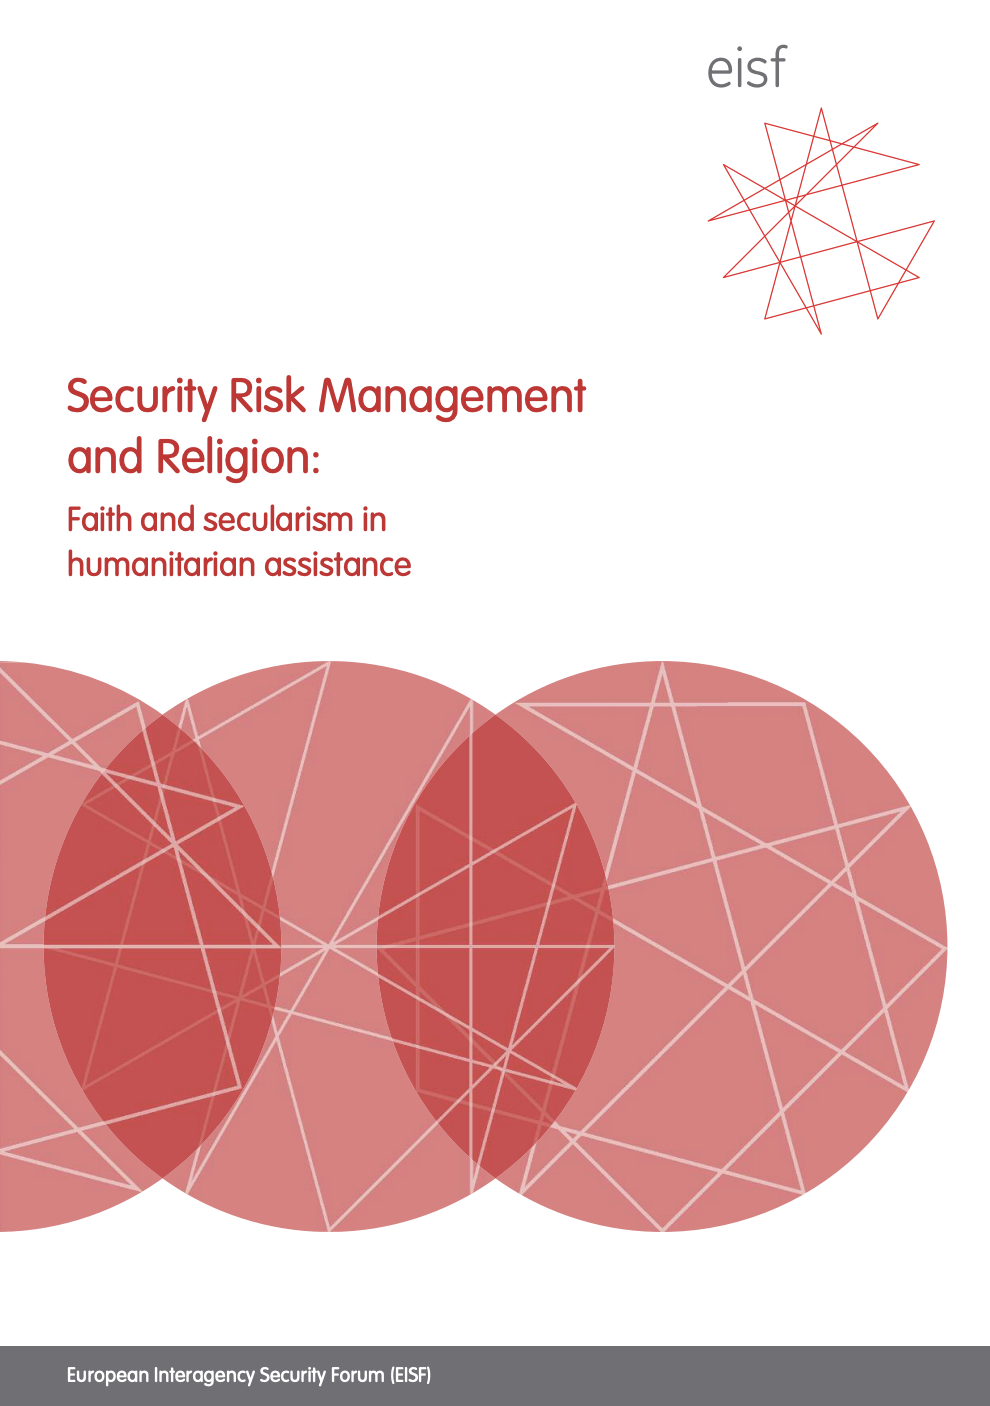 Security Risk Management and Religion: Faith and secularism in humanitarian assistance